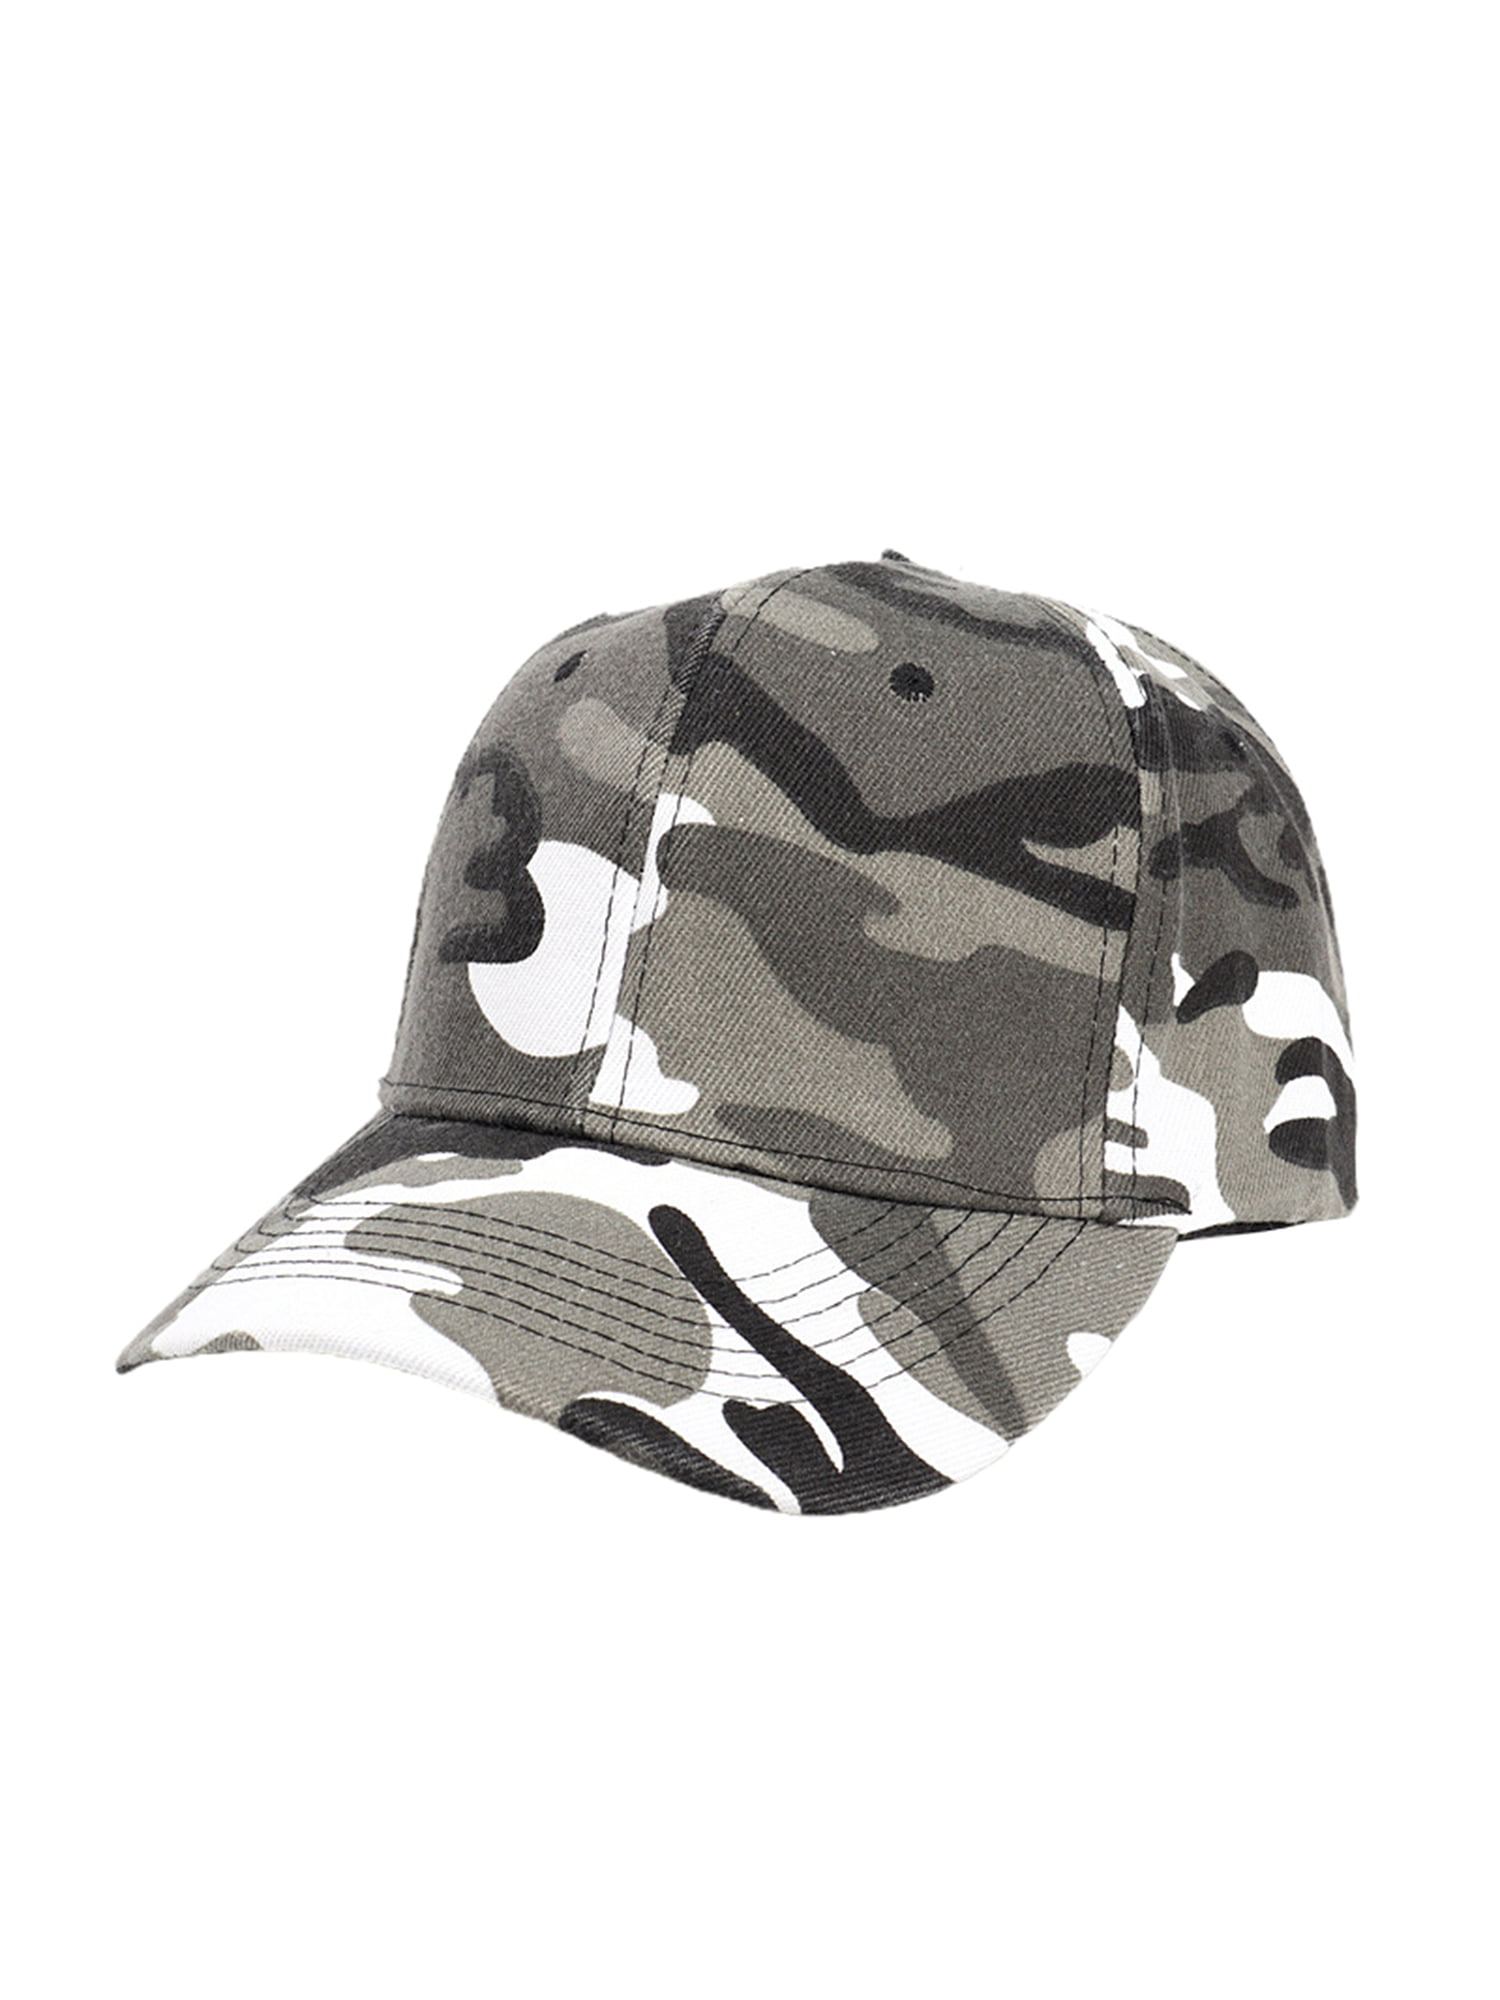 Women Sport Military Hat Cap Summer Holiday Army BASEBALL Size Adjustable Cotton 